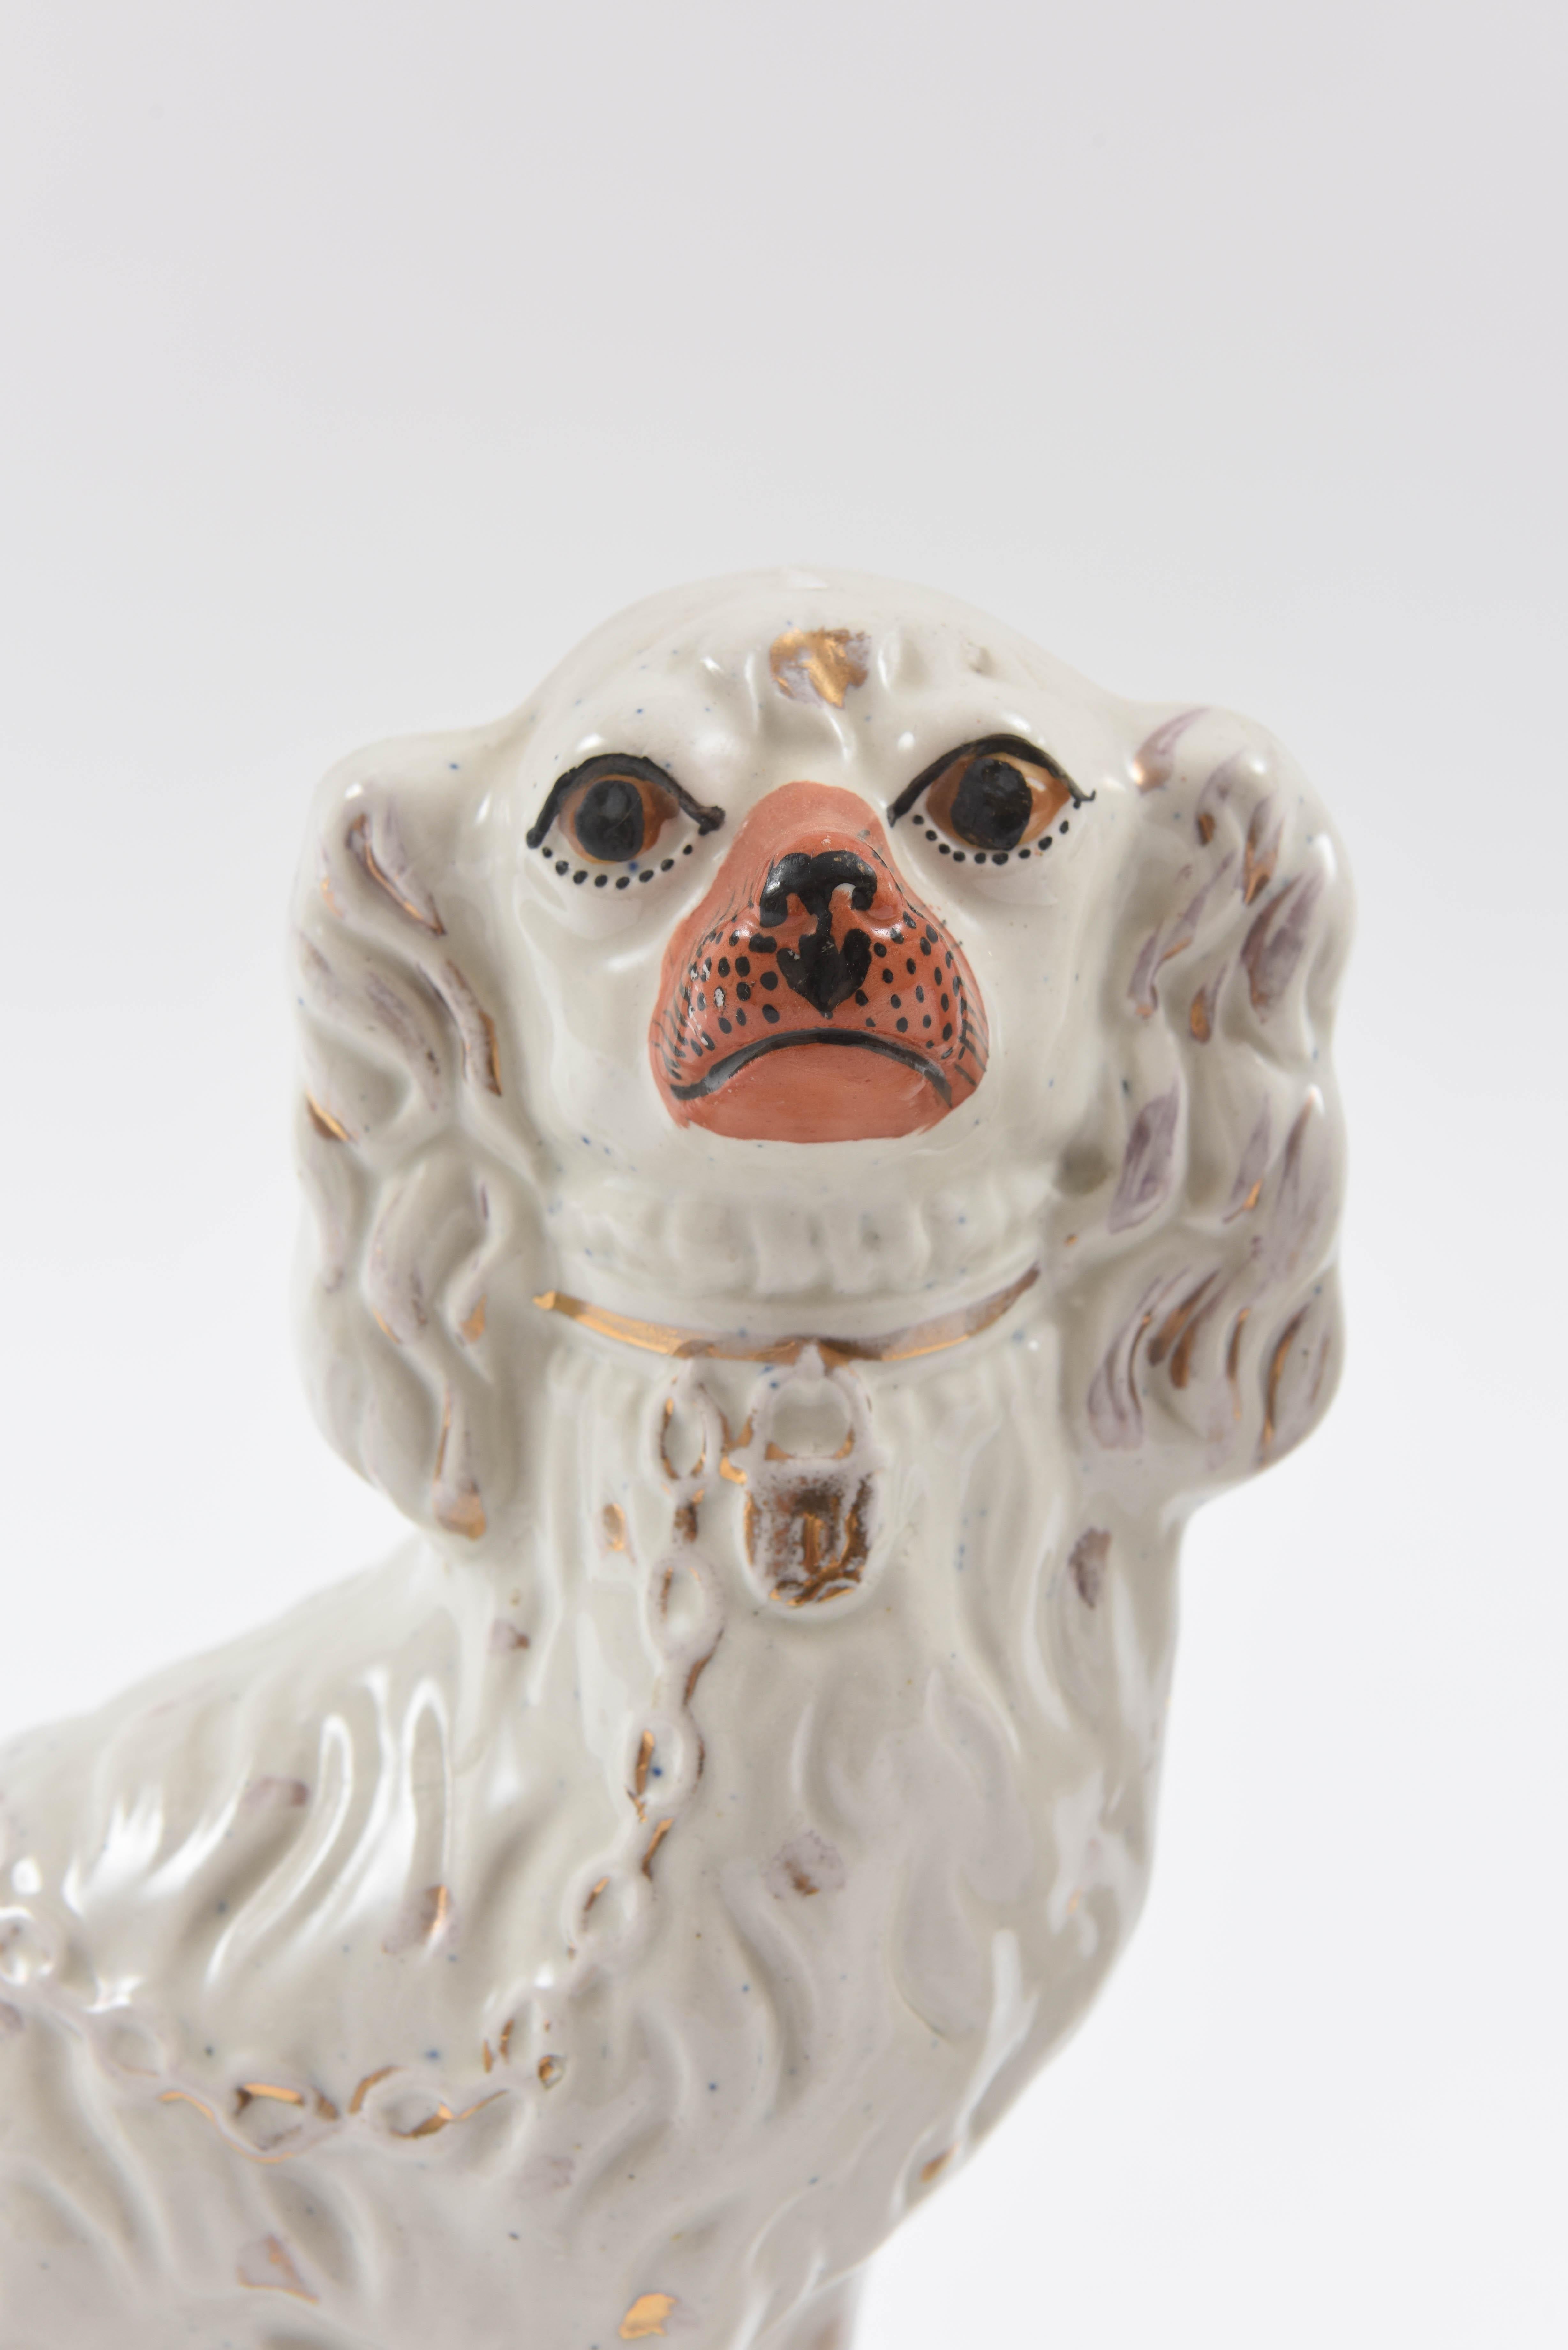 A Classic pair to grace your mantel or book cases. This pair of mid-19th century English porcelain dogs feature the whimsical and charming look, white ground, gold locket and orange snout. A nice size and in good antique condition.